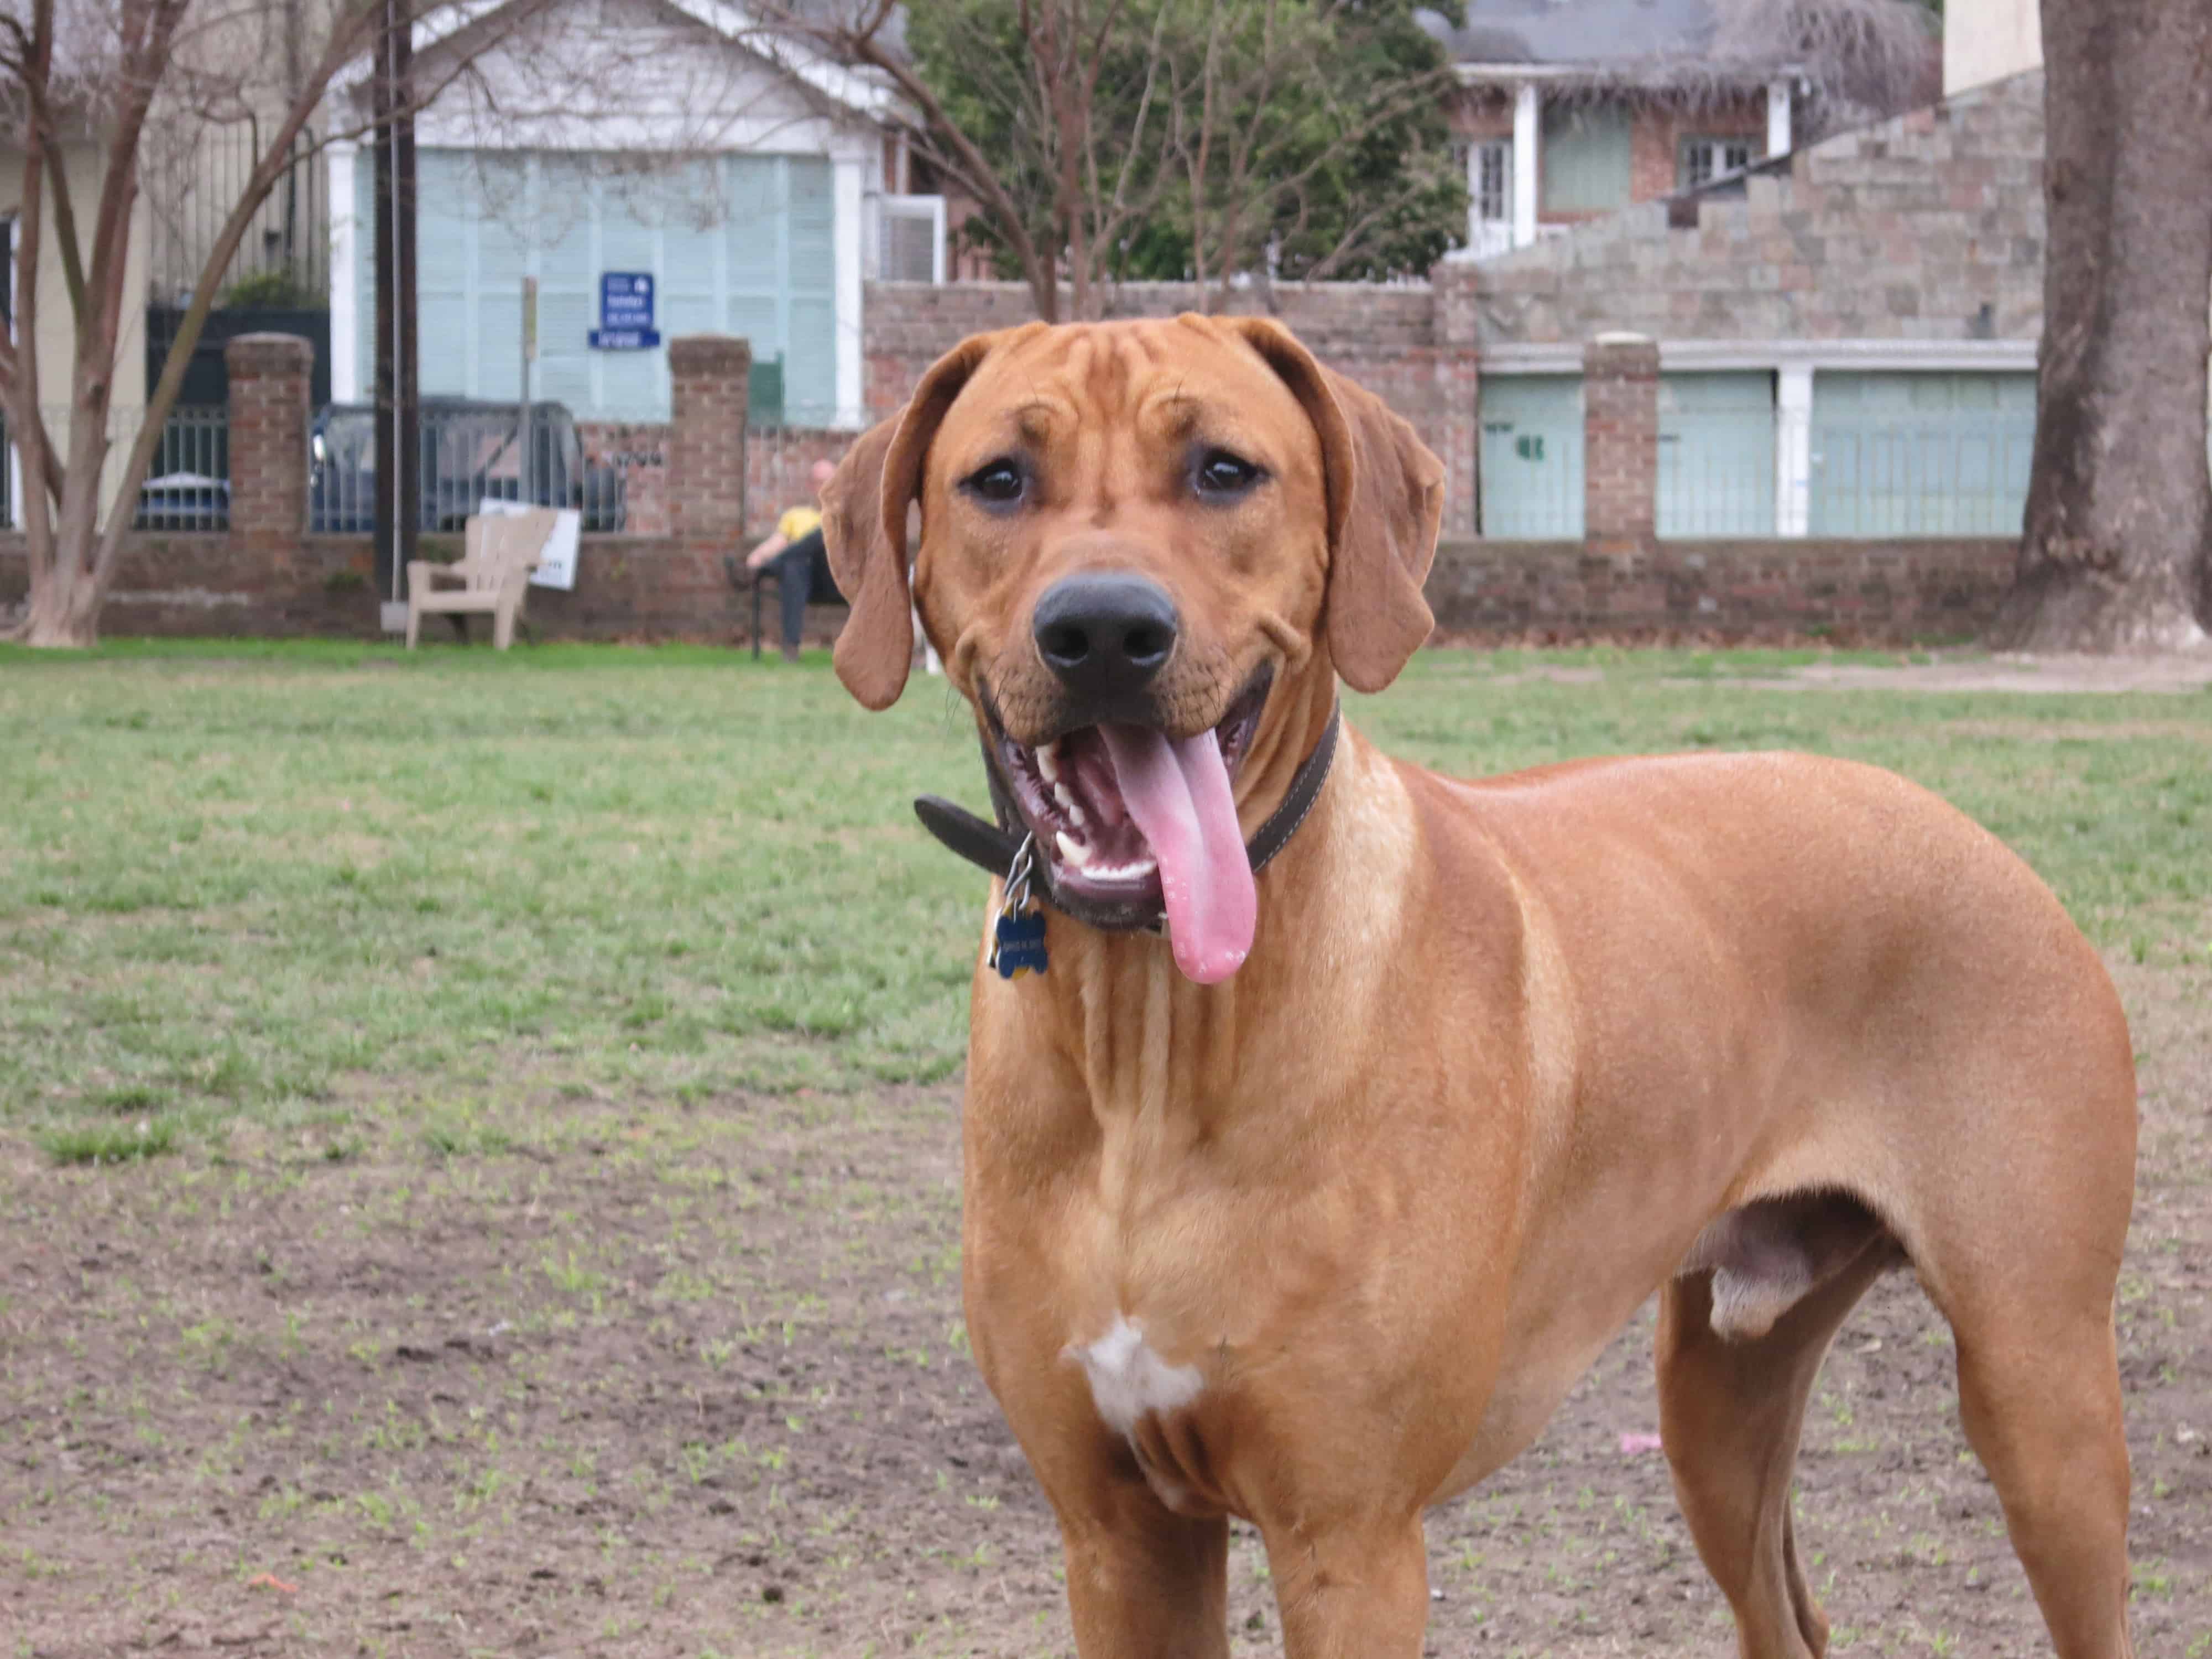 Rhodesian Ridgeback, adventure, dogs, marking our territory, petcentric, pet-friendly